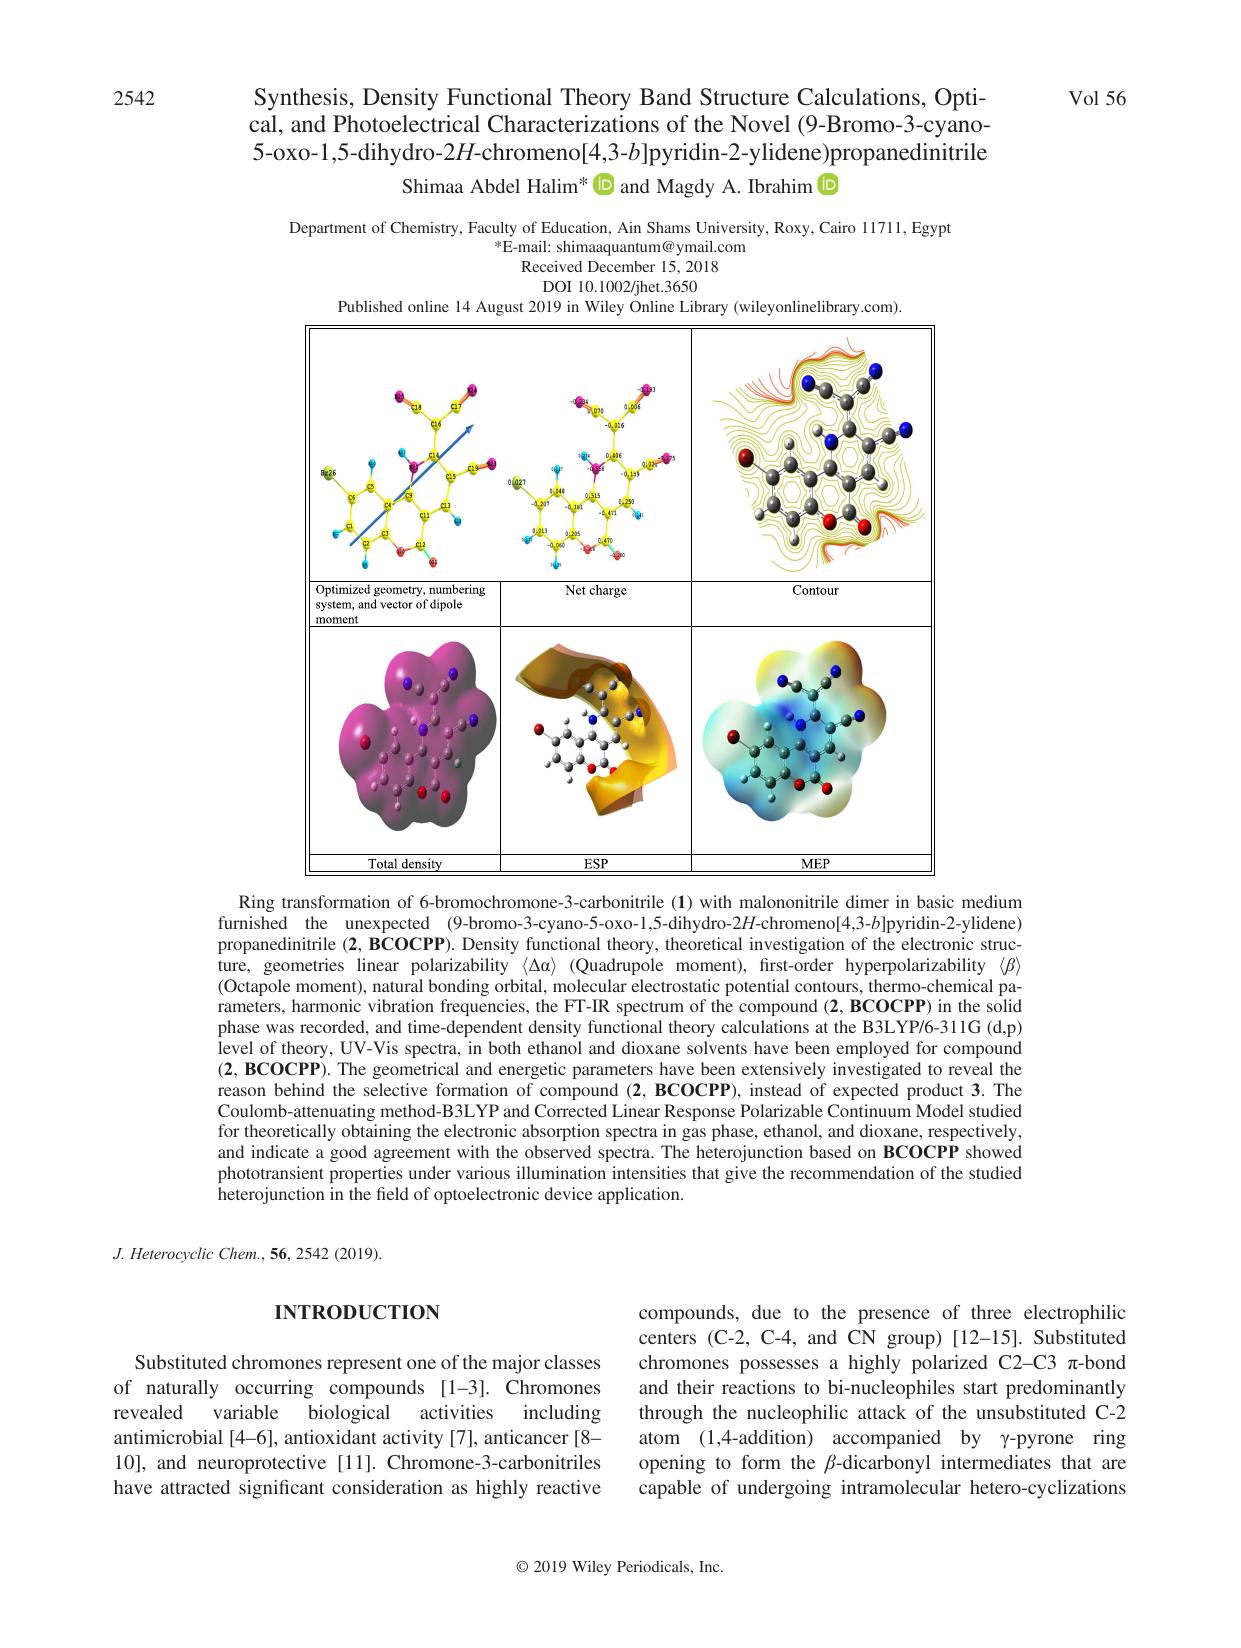 Synthesis, Density Functional Theory Band Structure Calculations, Optical, and Photoelectrical Characterizations of the Novel (9-Bromo-3-cyano-5-oxo-1,5-dihydro-2H-chromeno[4,3-b]p by Shimaa Abdel Halim & Magdy A. Ibrahim